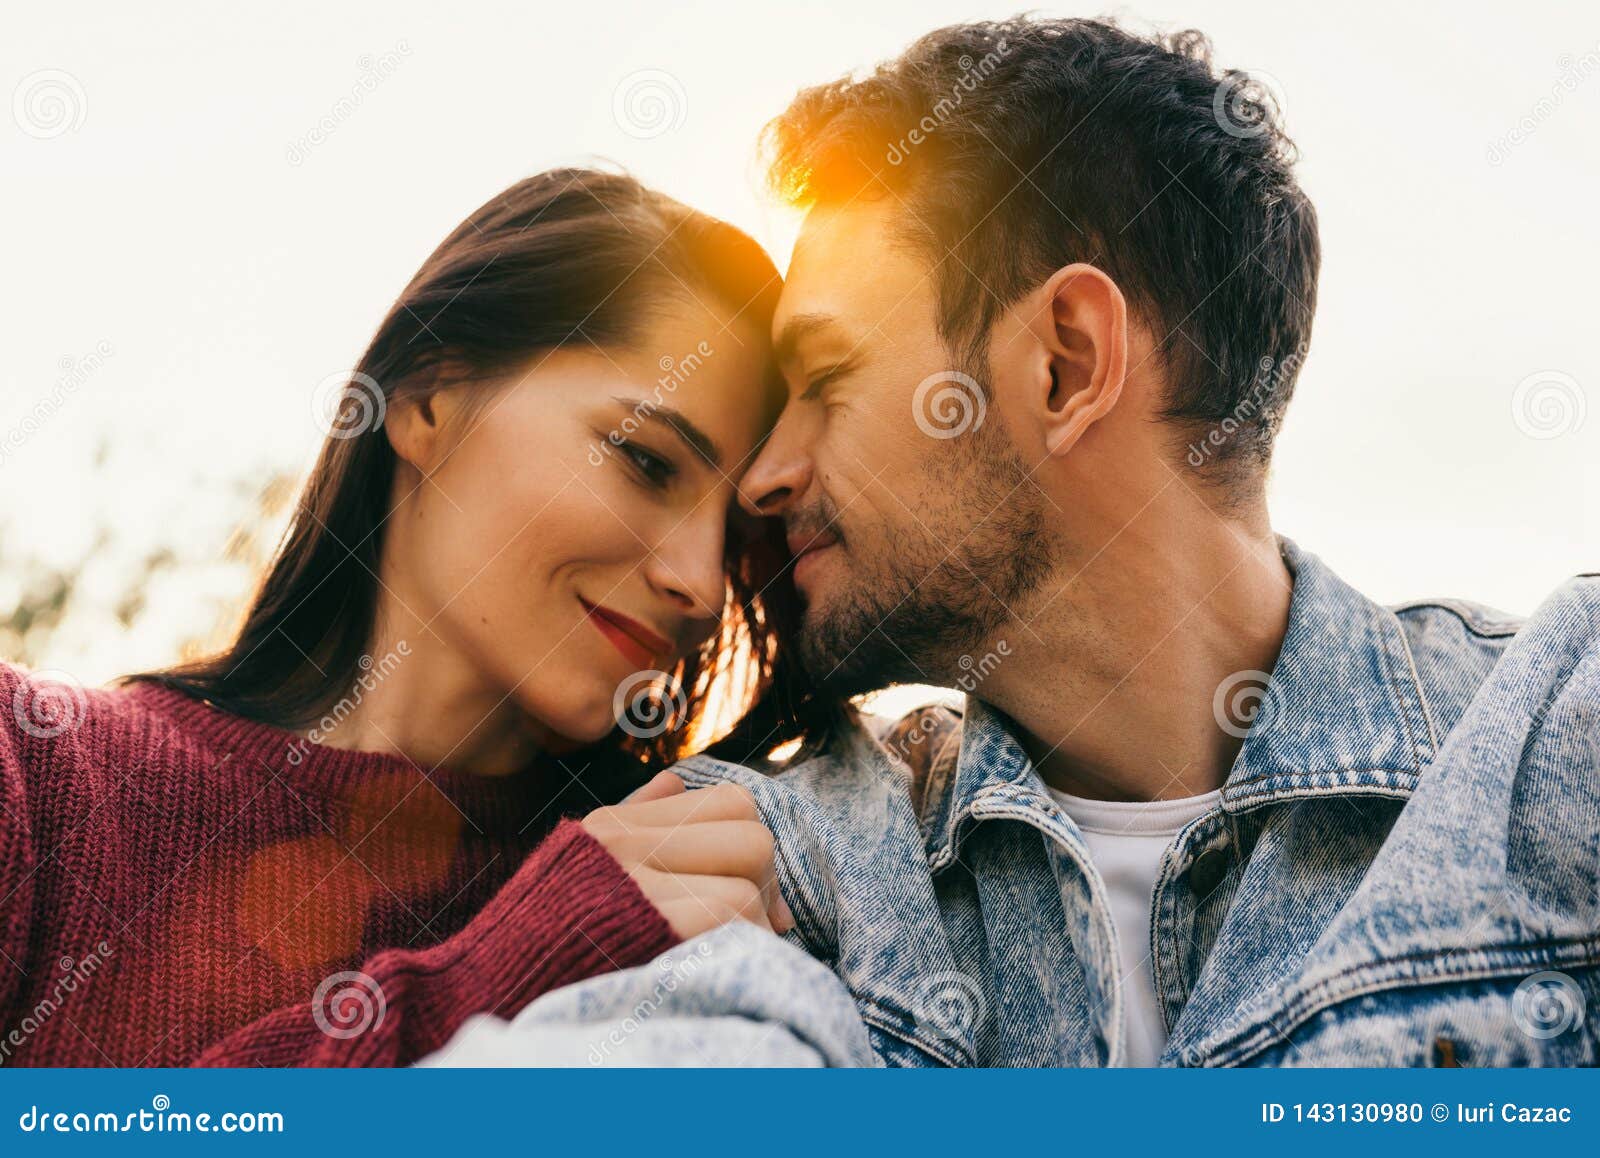 Happy Couple In Love Enjoying Sunshine Embracing Each Other Looking